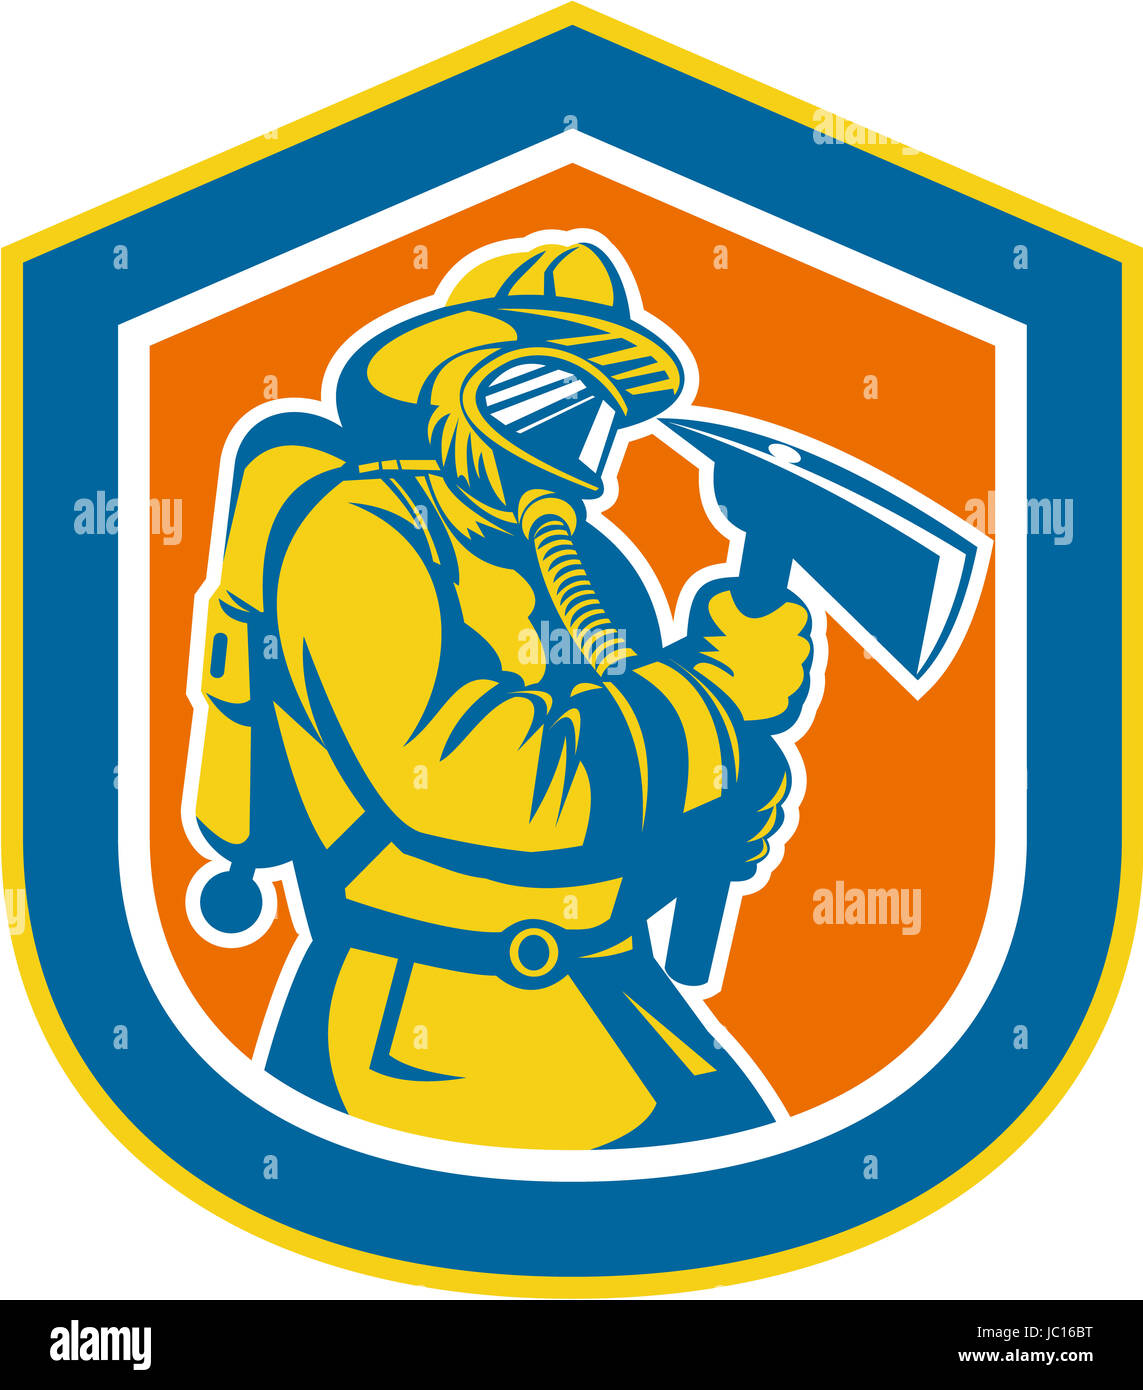 Illustration of a fireman fire fighter emergency worker holding a fire axe viewed from front set inside crest shield done in retro style. Stock Photo